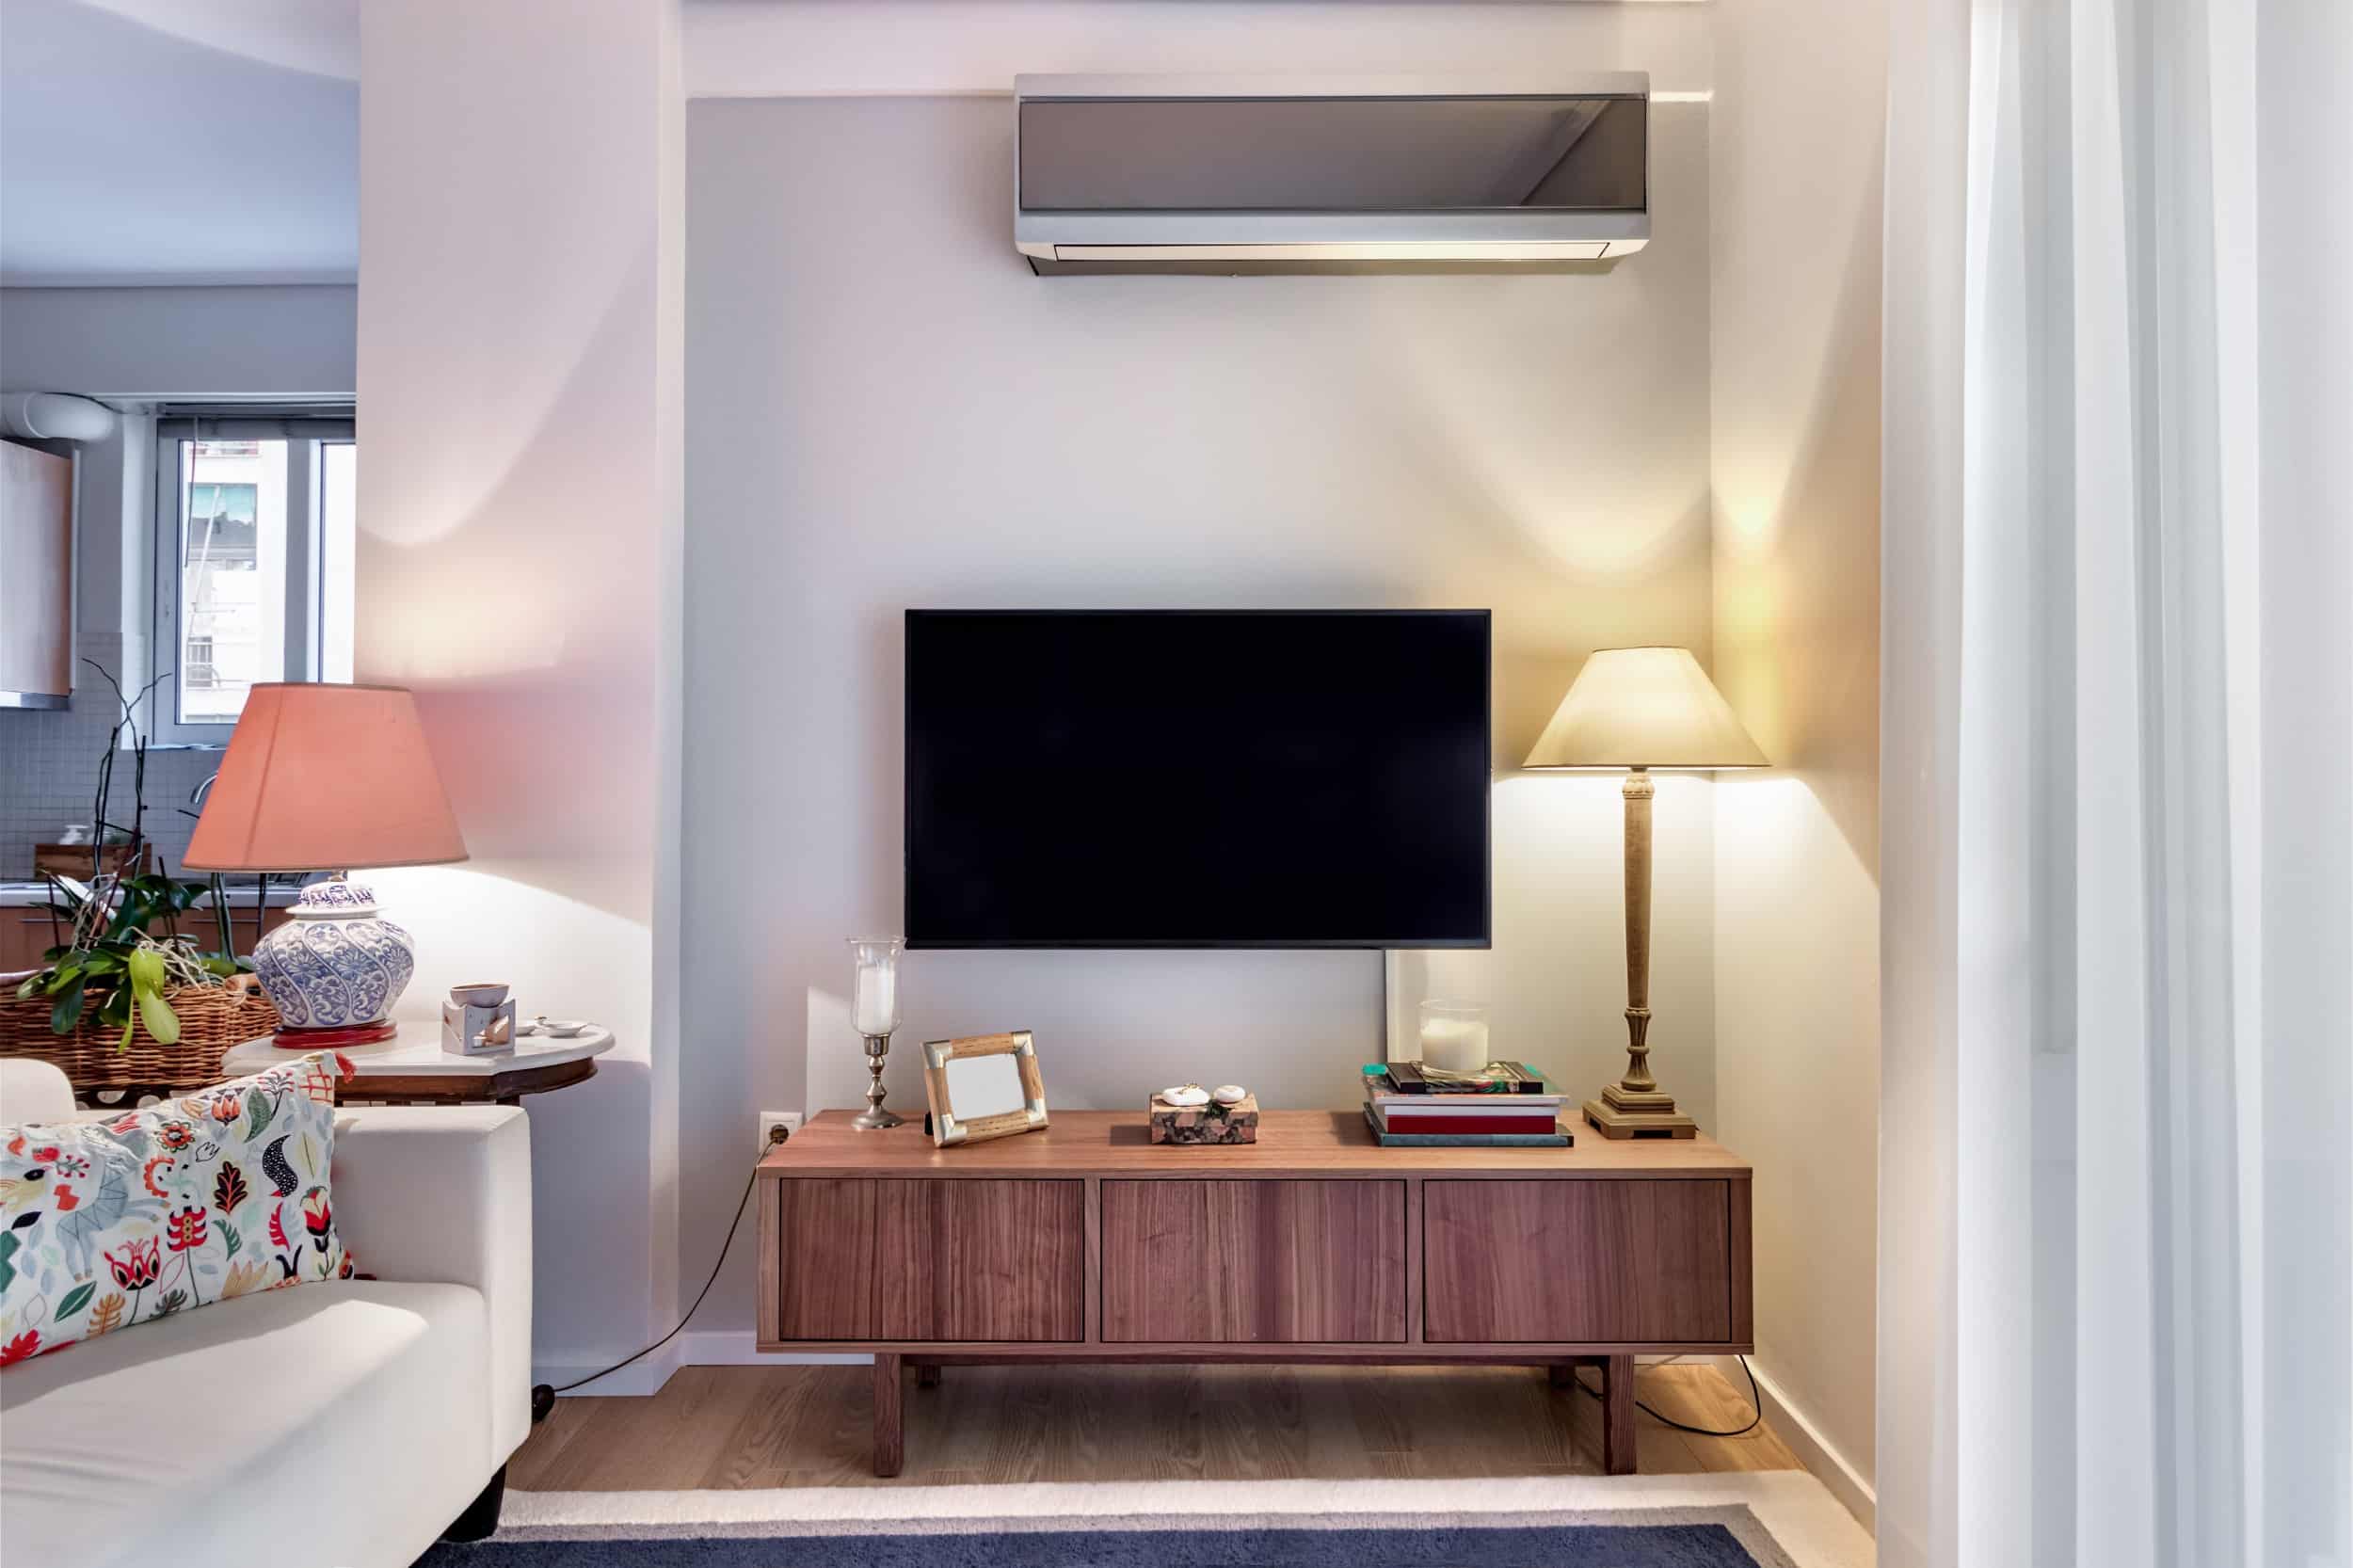 Best Ductless Mini-Split Locations In Your Home